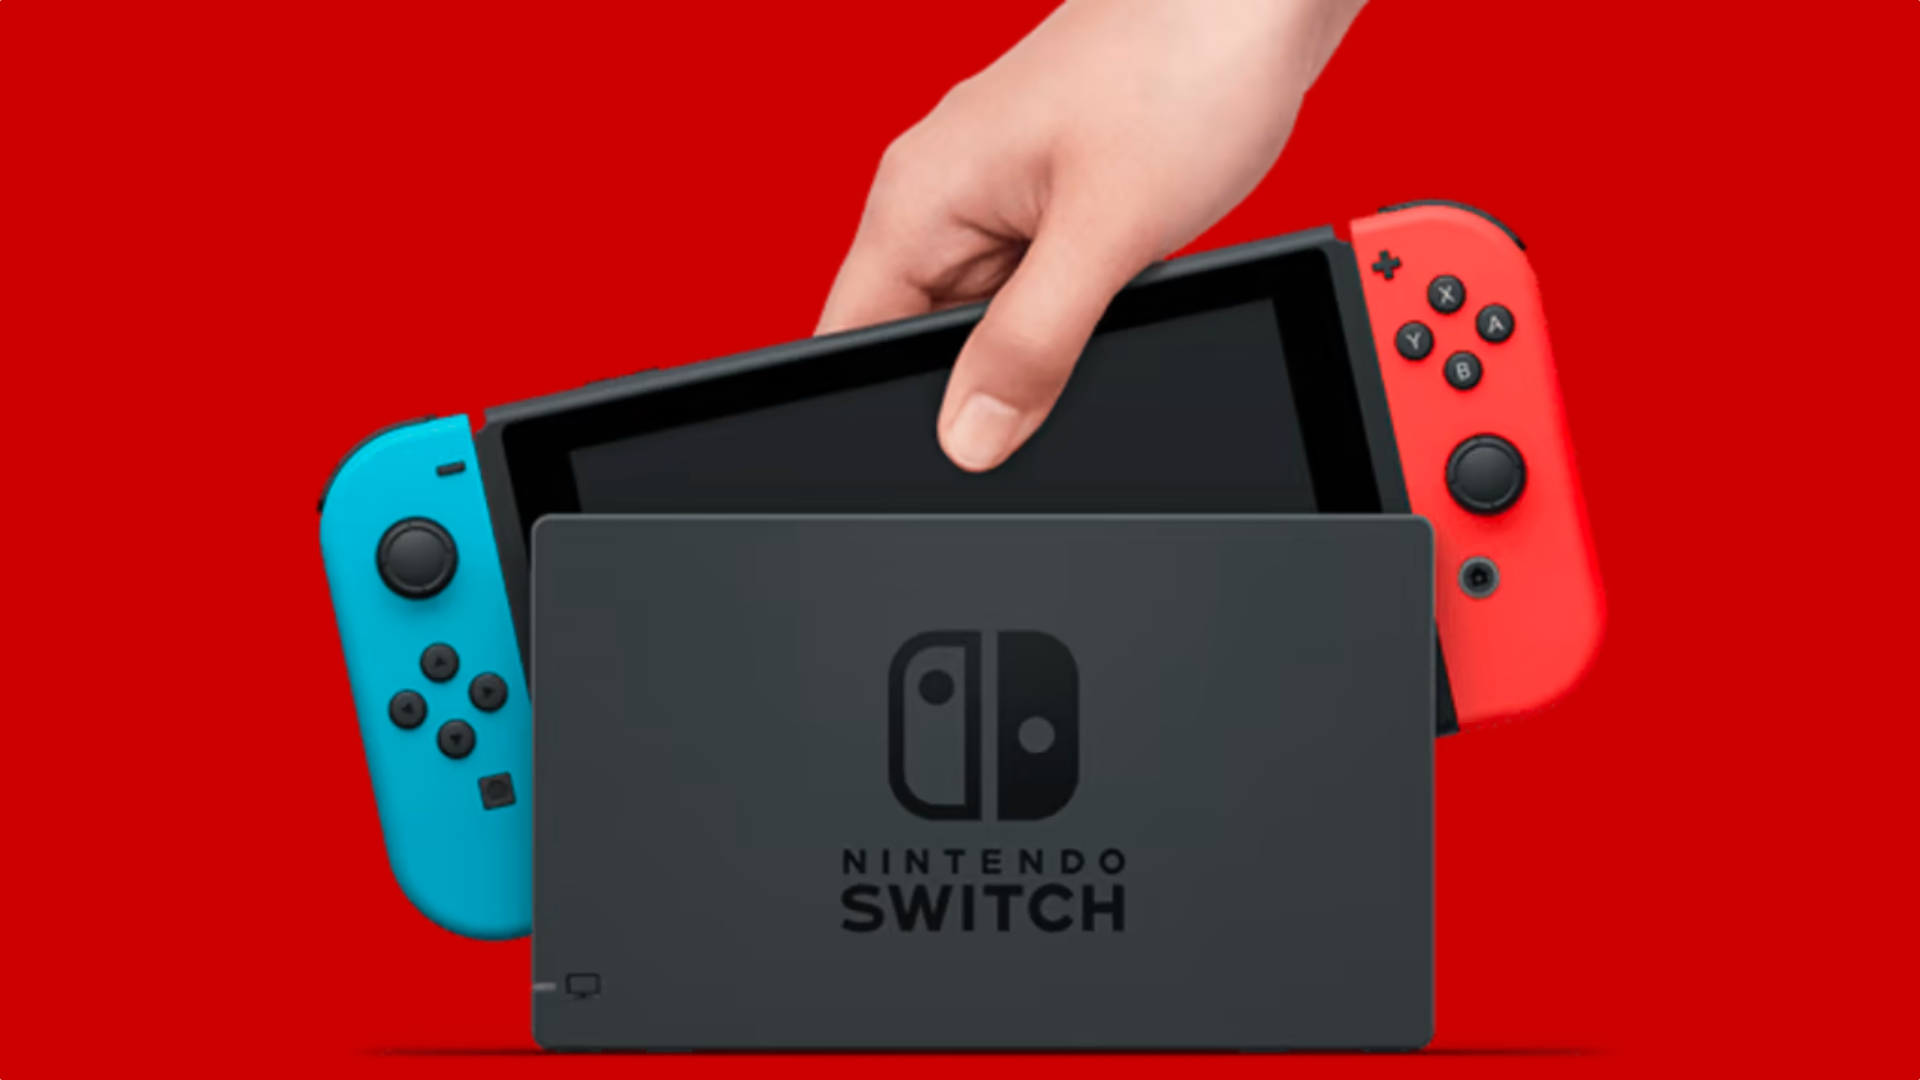 Nintendo Switch 2 might lack special hardware to run DLSS - SamMobile